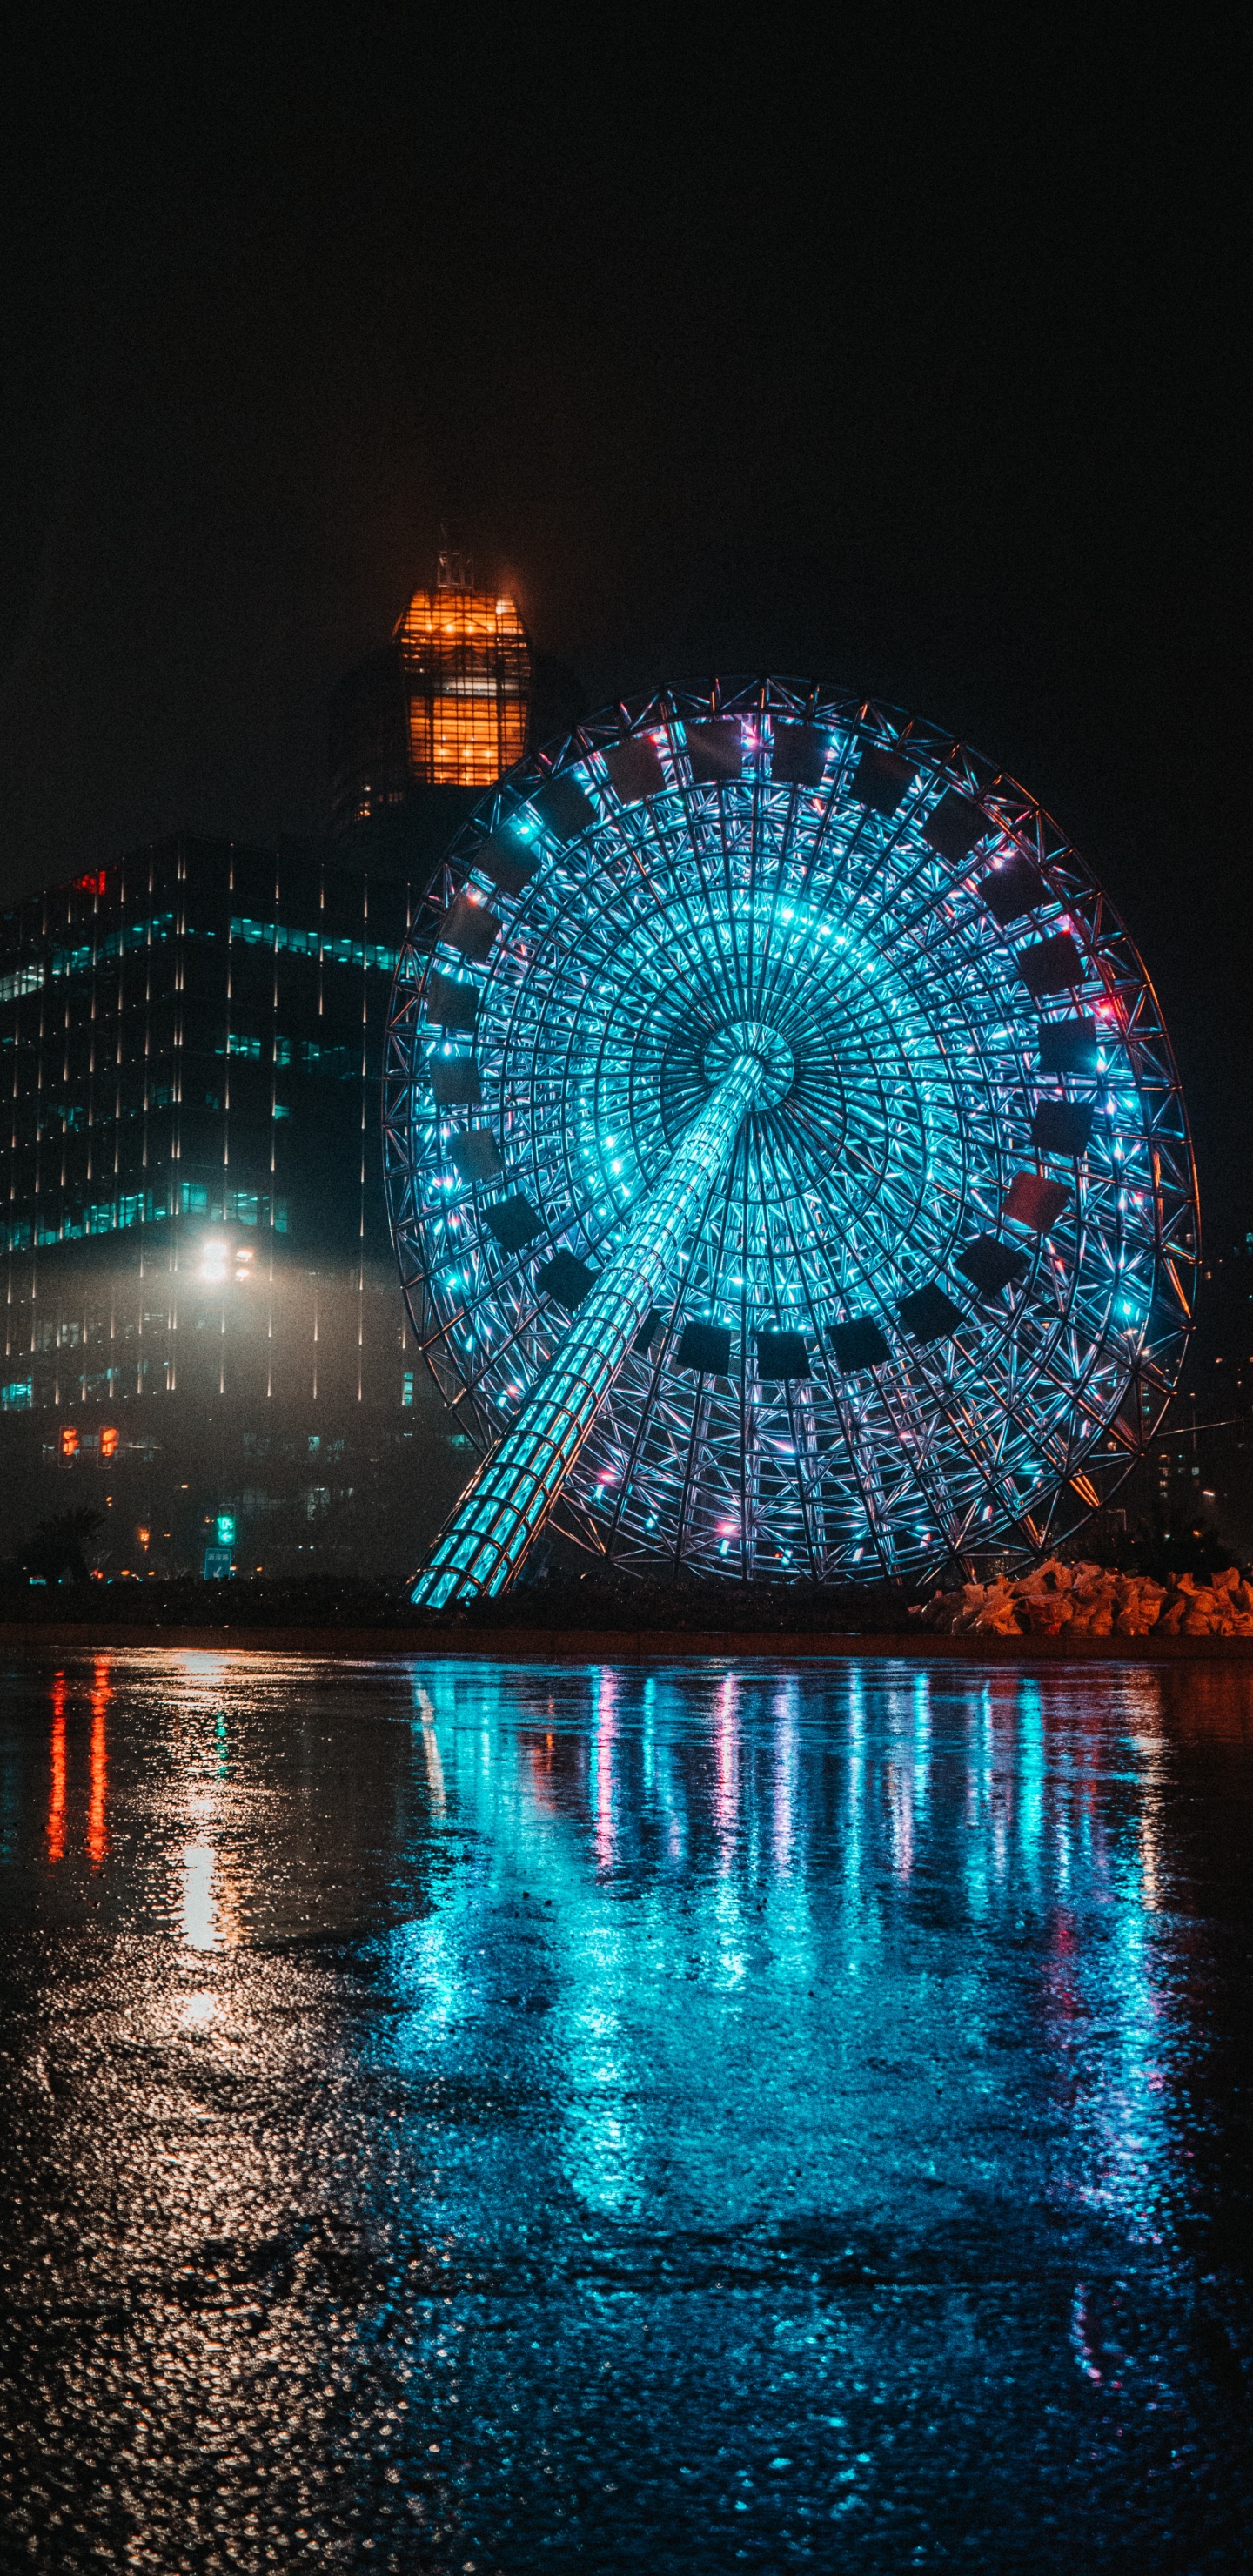 Blue and White Ferris Wheel During Night Time. Wallpaper in 1440x2960 Resolution